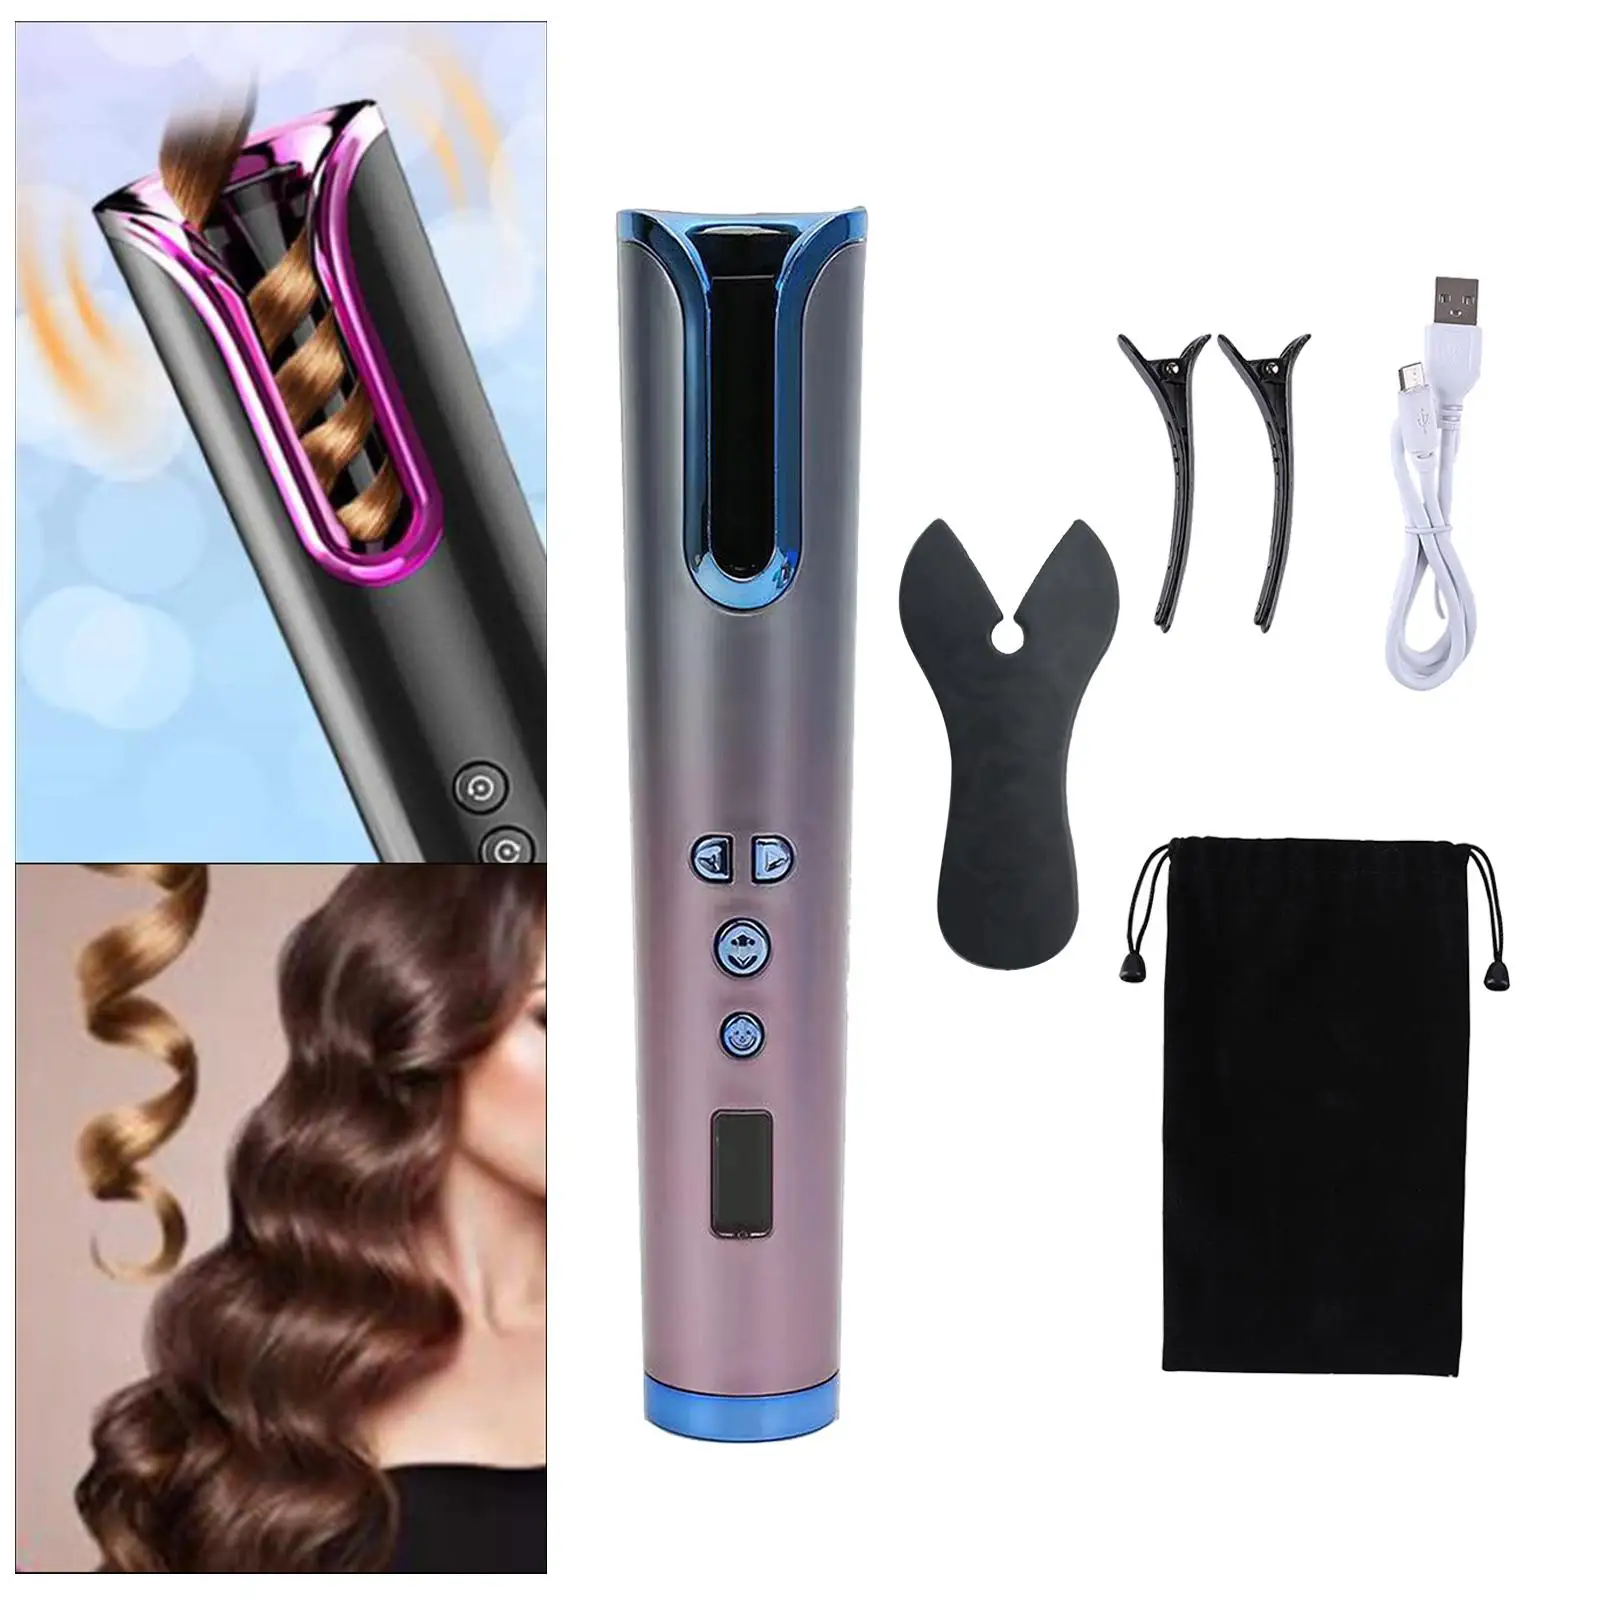 Cordless Hair Curler USB Rechargeable Automatic Curling Iron,LCD screen Display